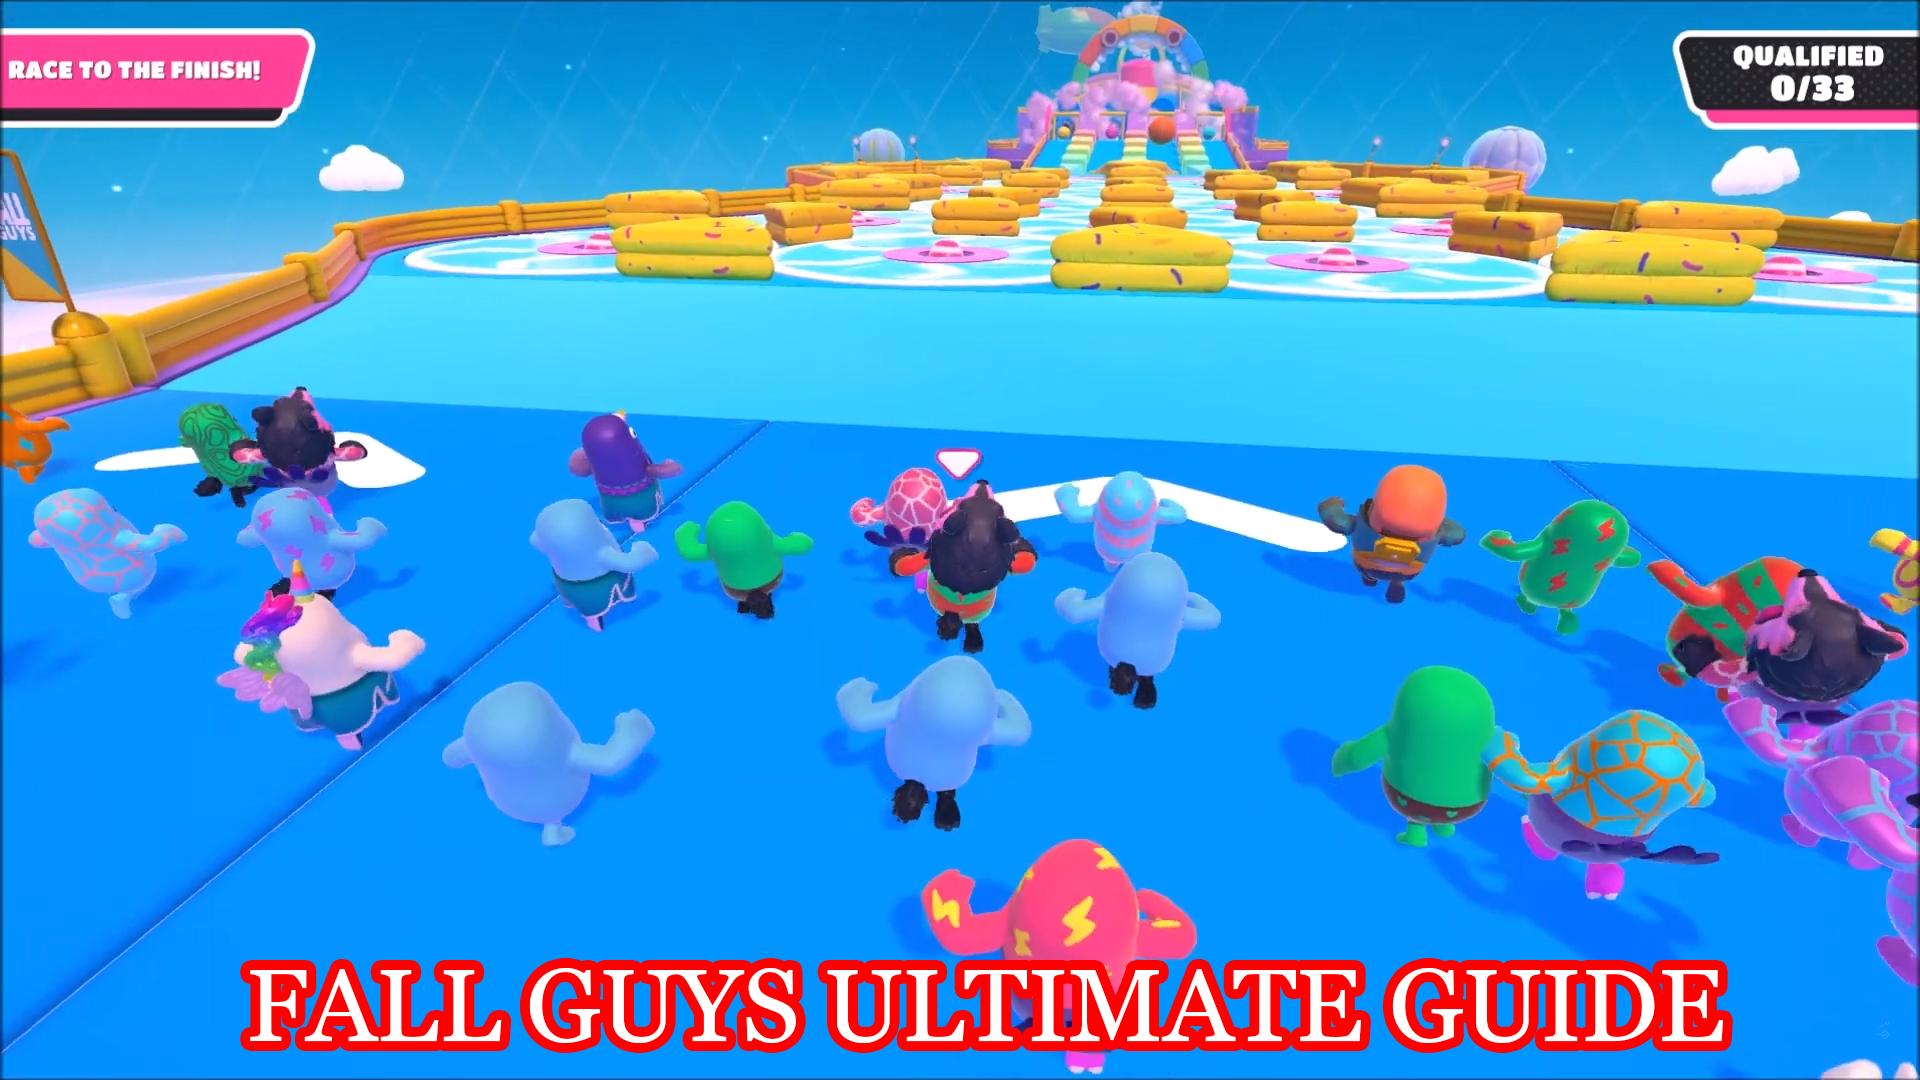 Fall Guys Ultimate Knockout Game Guide 1.0 Screenshot 4